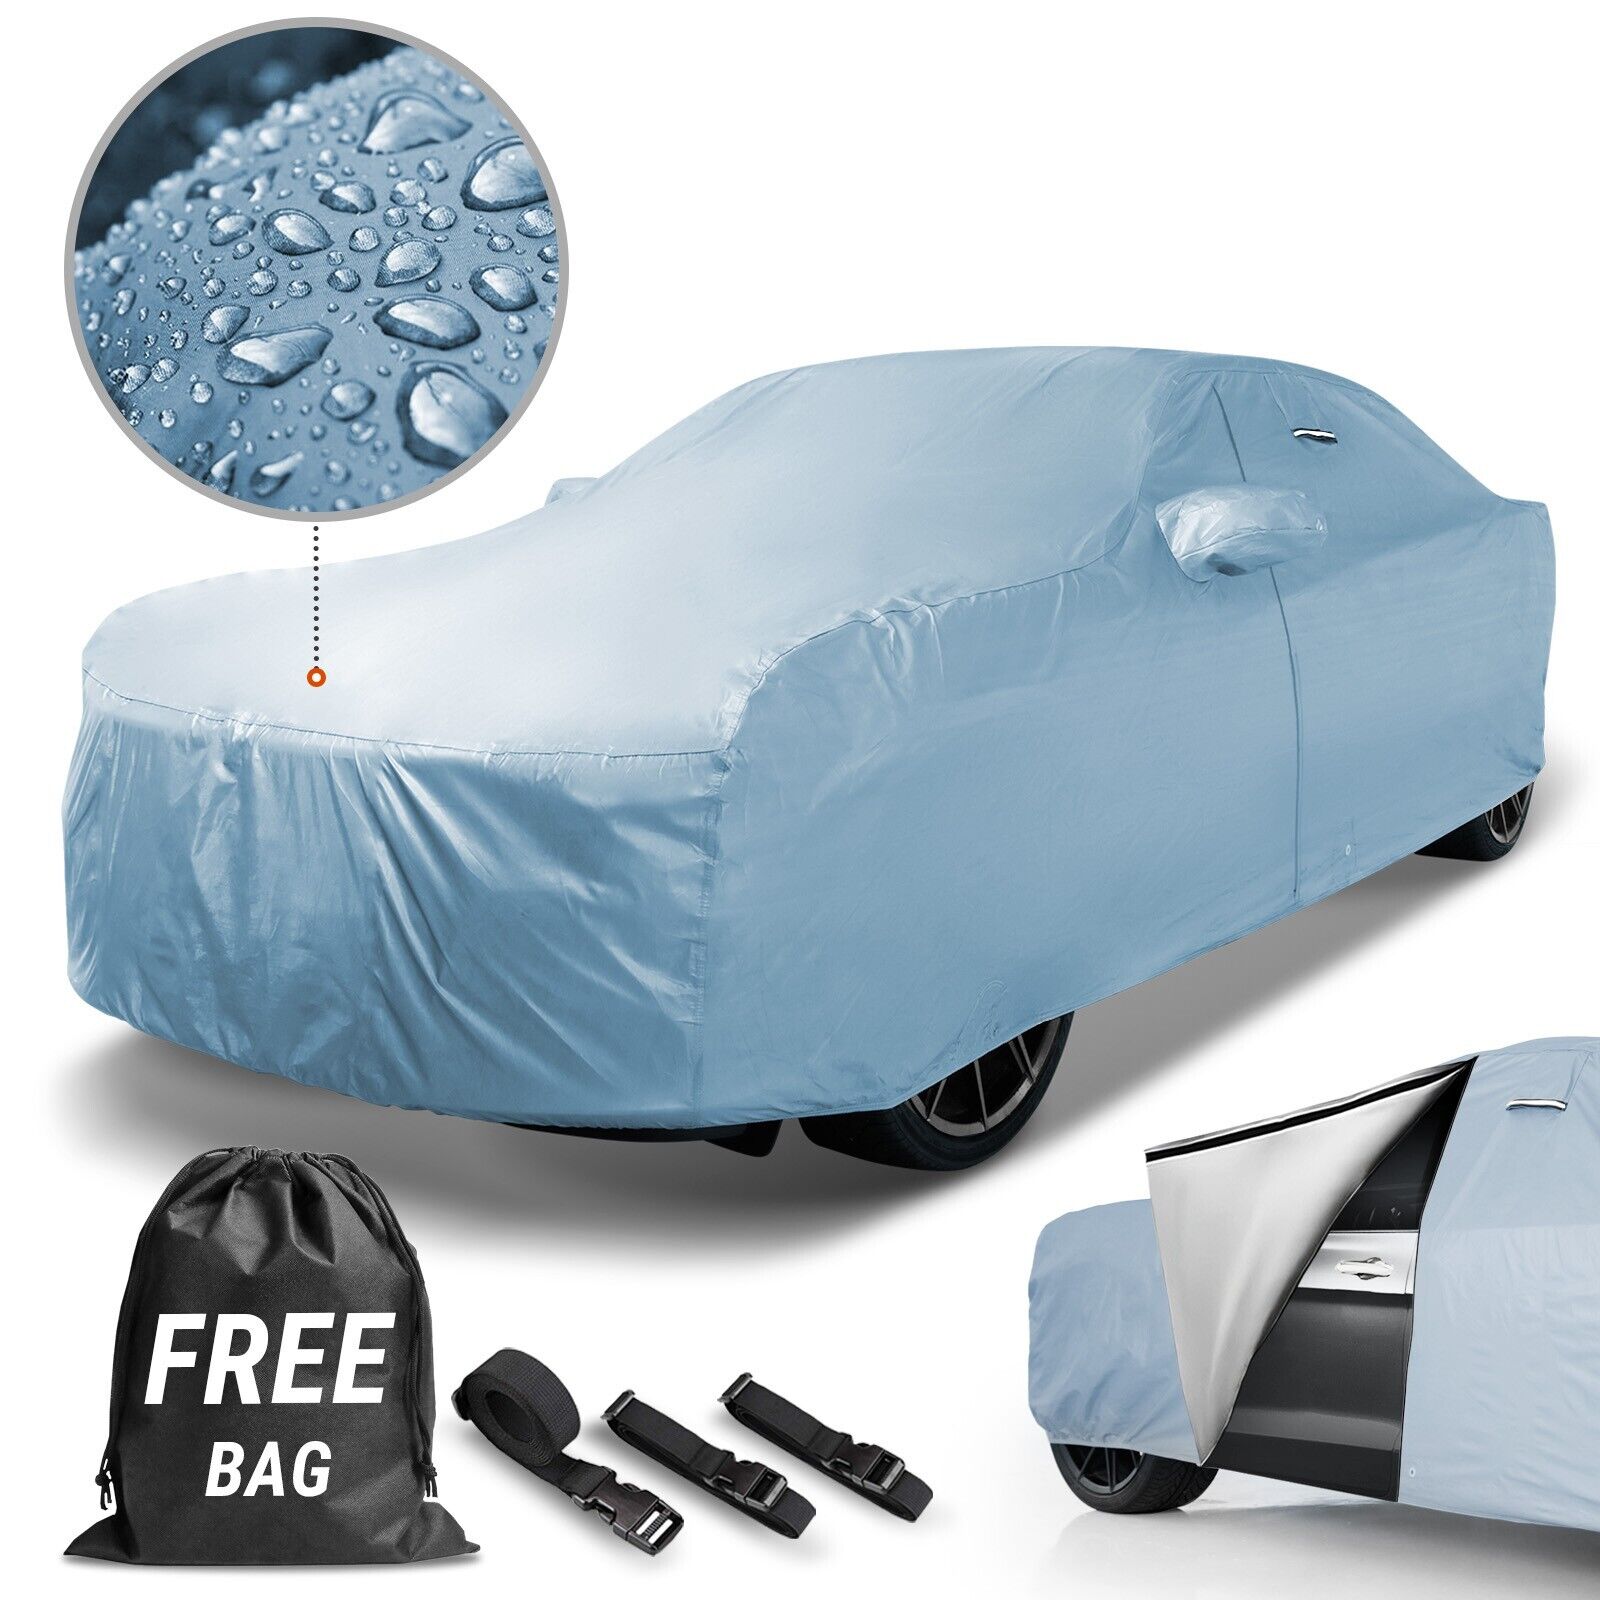 2010-2019 Aston Martin Rapide Custom Car Cover - All-Weather Waterproof Outdoor